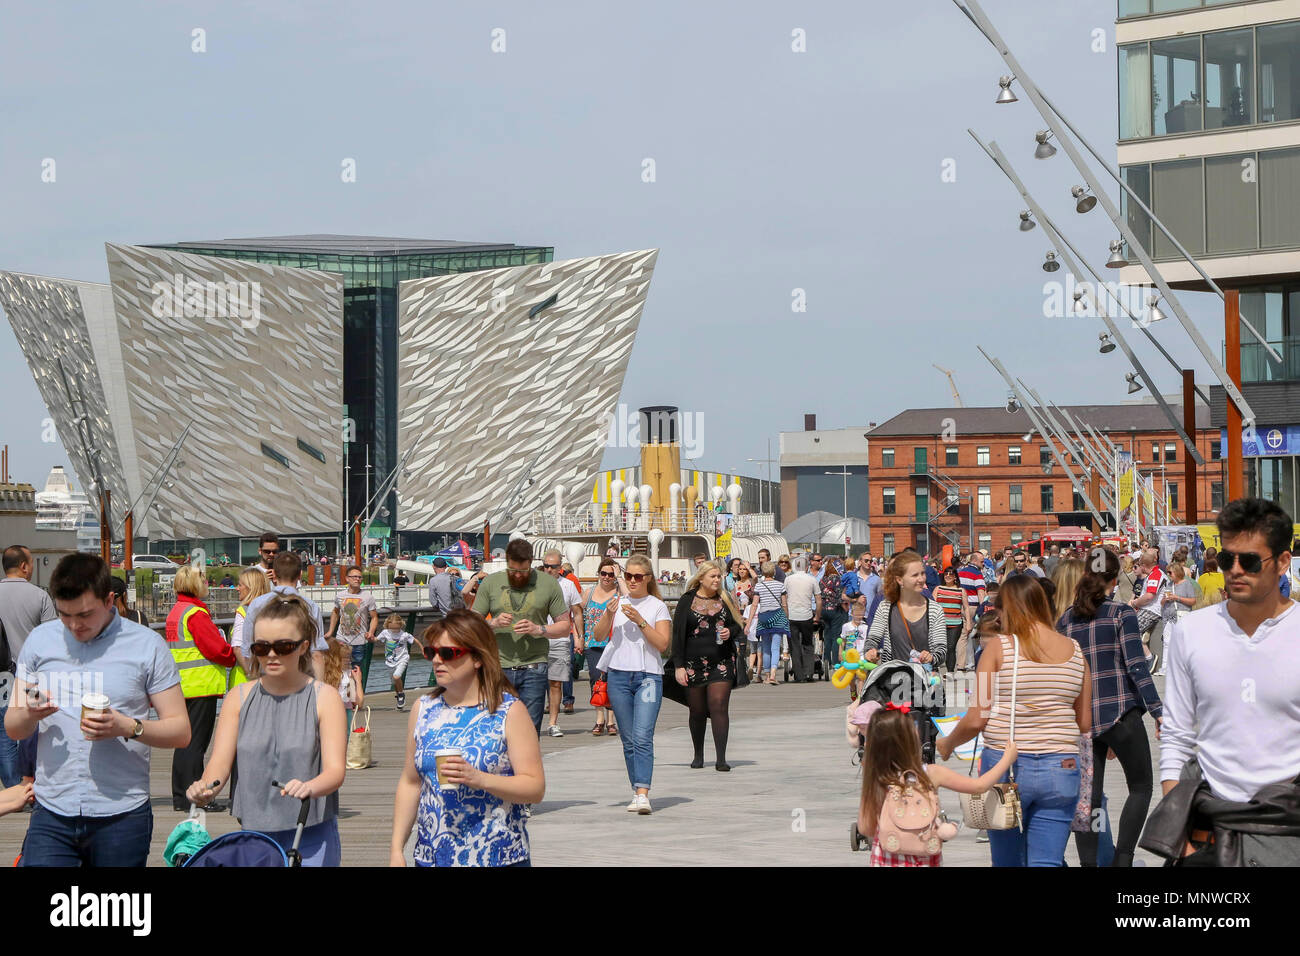 Belfast, UK, 19 May 2018. Titanic Quarter and Donegall Quay Belfast, Northern Ireland, UK. 19 May 2018. The Belfast Titanic Maritime Festival is being held today and tomorrow (Sunday 20th May). The maritime-themed festival is centred around the docks and has visiting ships, tall ships and family themed events as well as a food market. Credit: David Hunter/Alamy Live News. Stock Photo